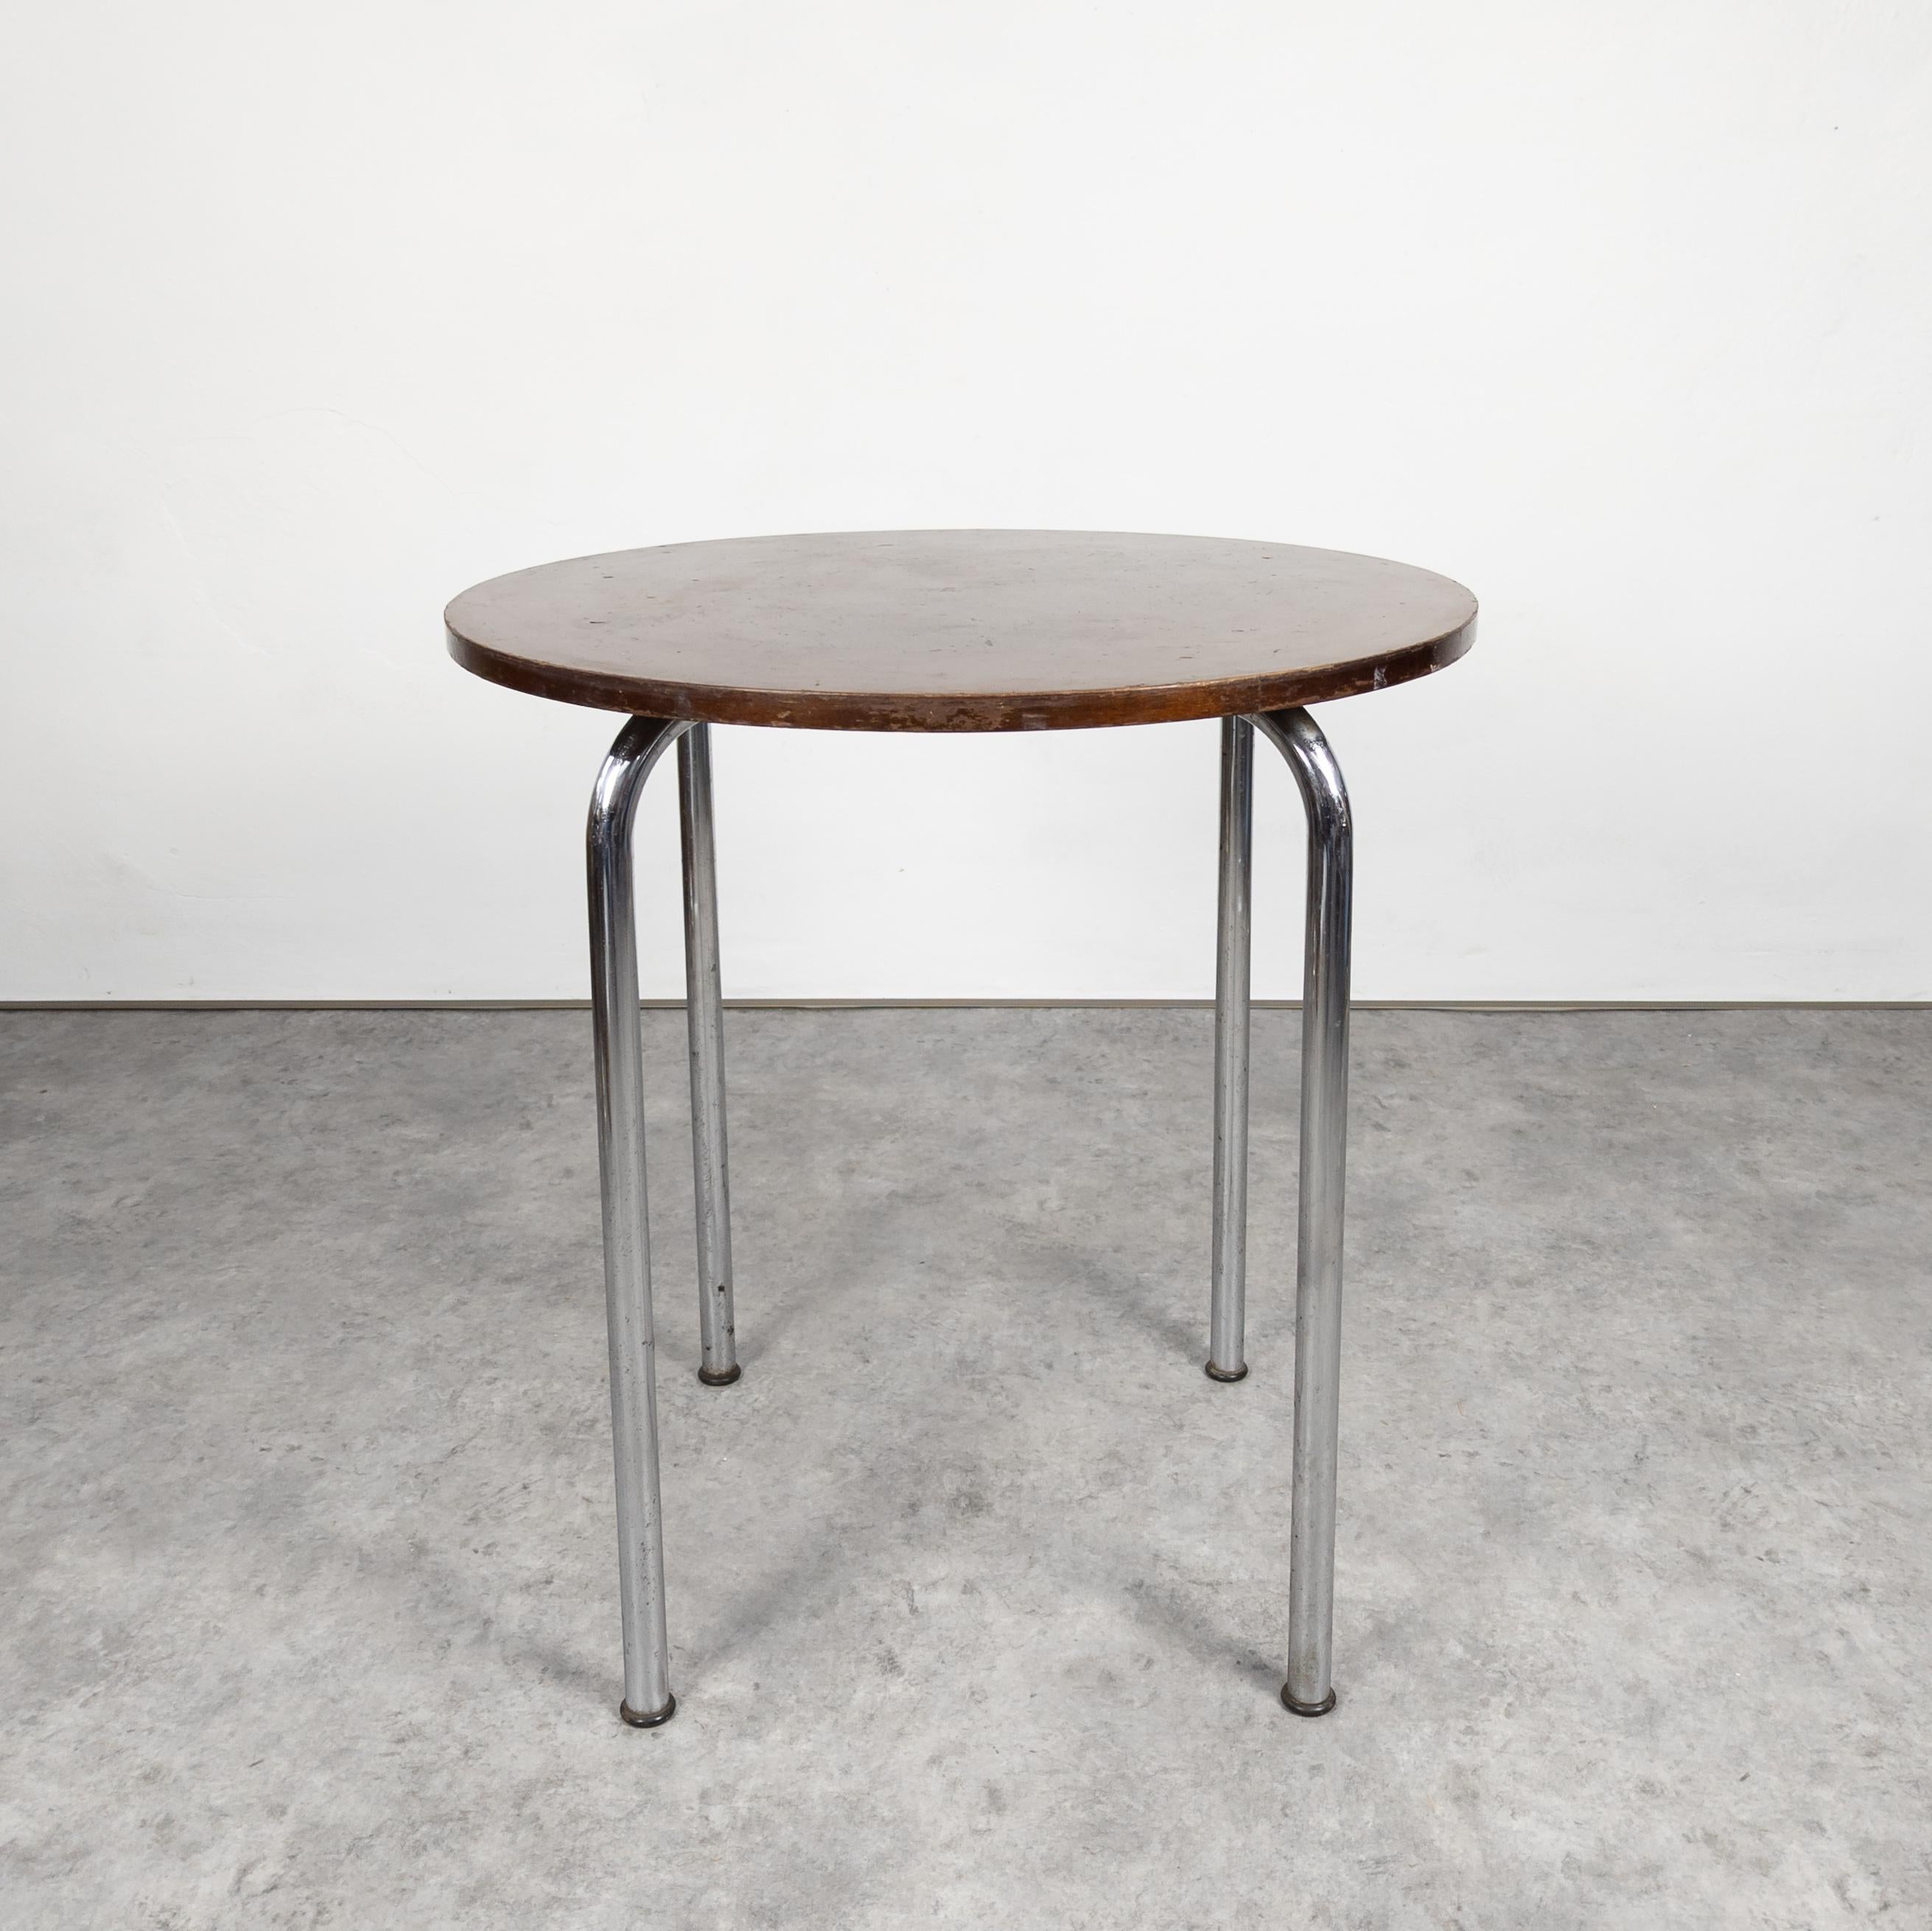 Czech Vintage Thonet Mr 515 Table by Mies Van Der Rohe